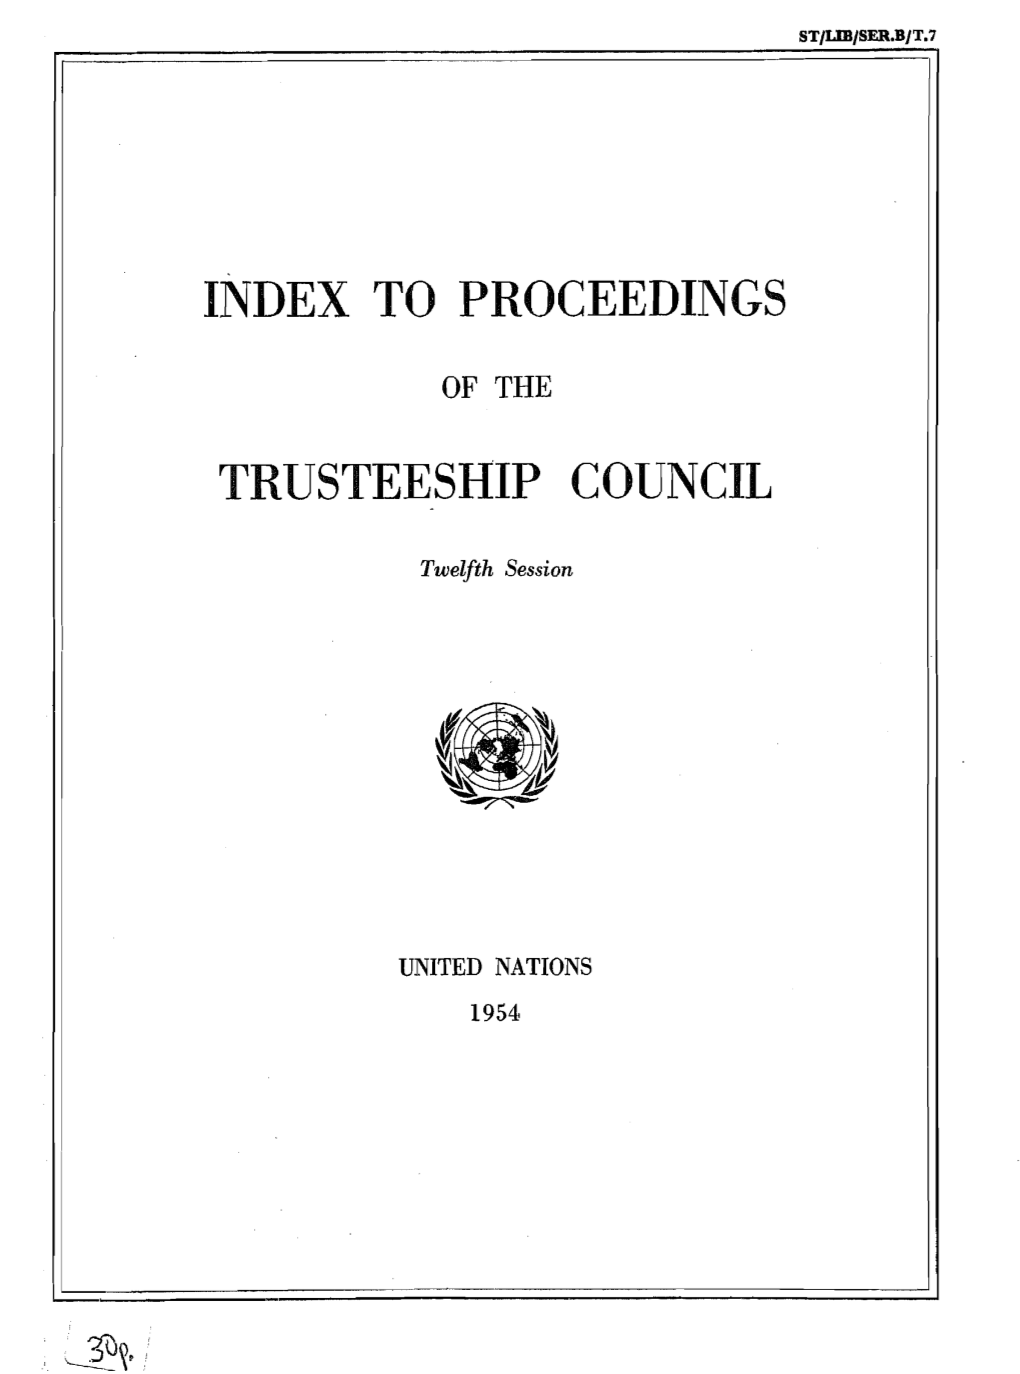 To Proceedings of the Trusteeship Council, 1953